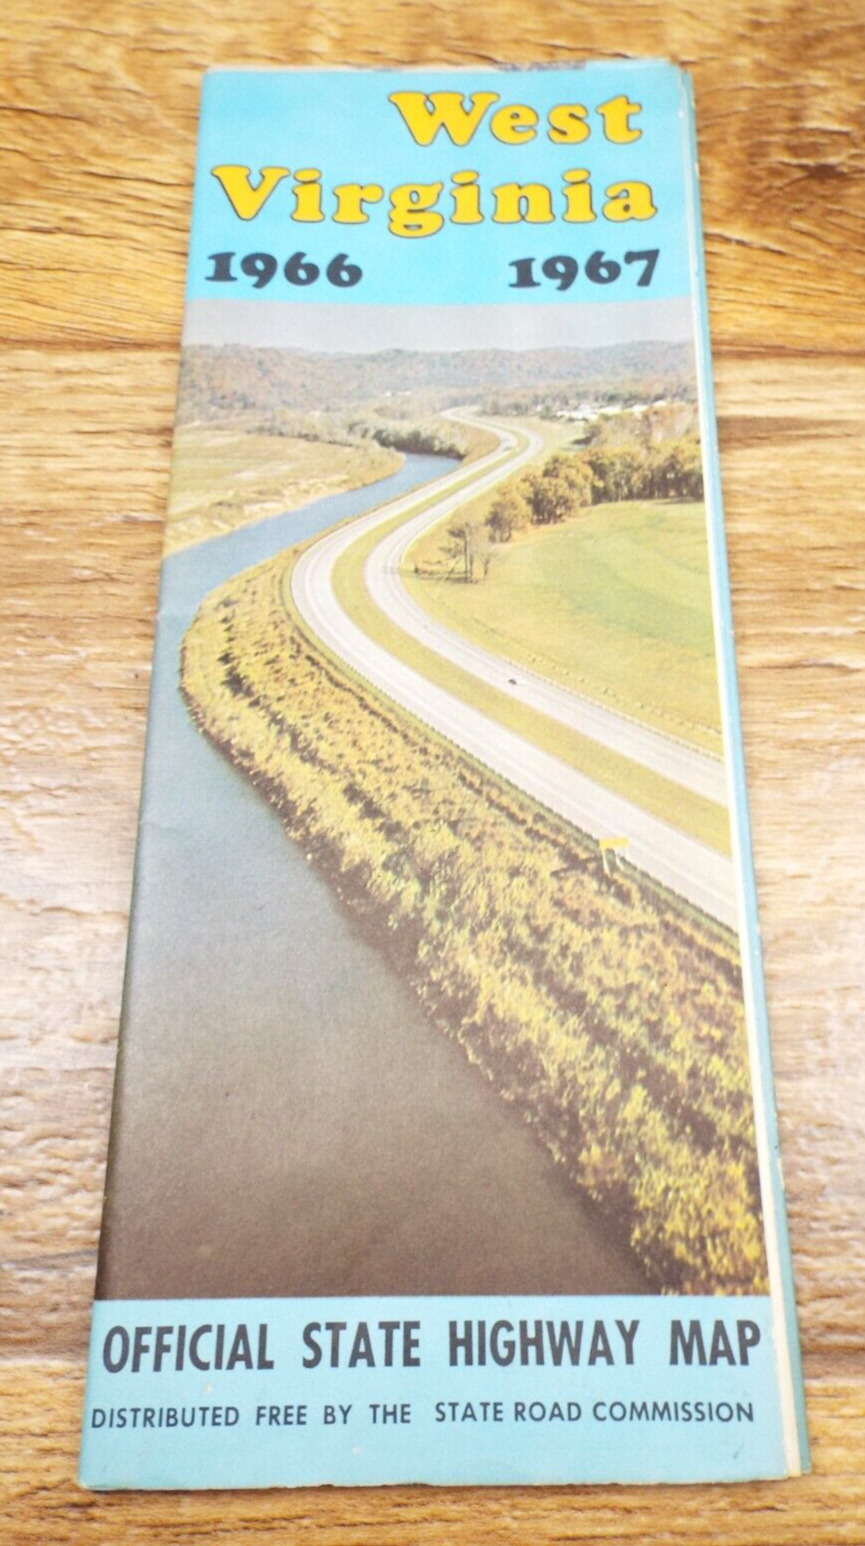 Vintage 1967 West Virginia Official Road Map – State Highway Department